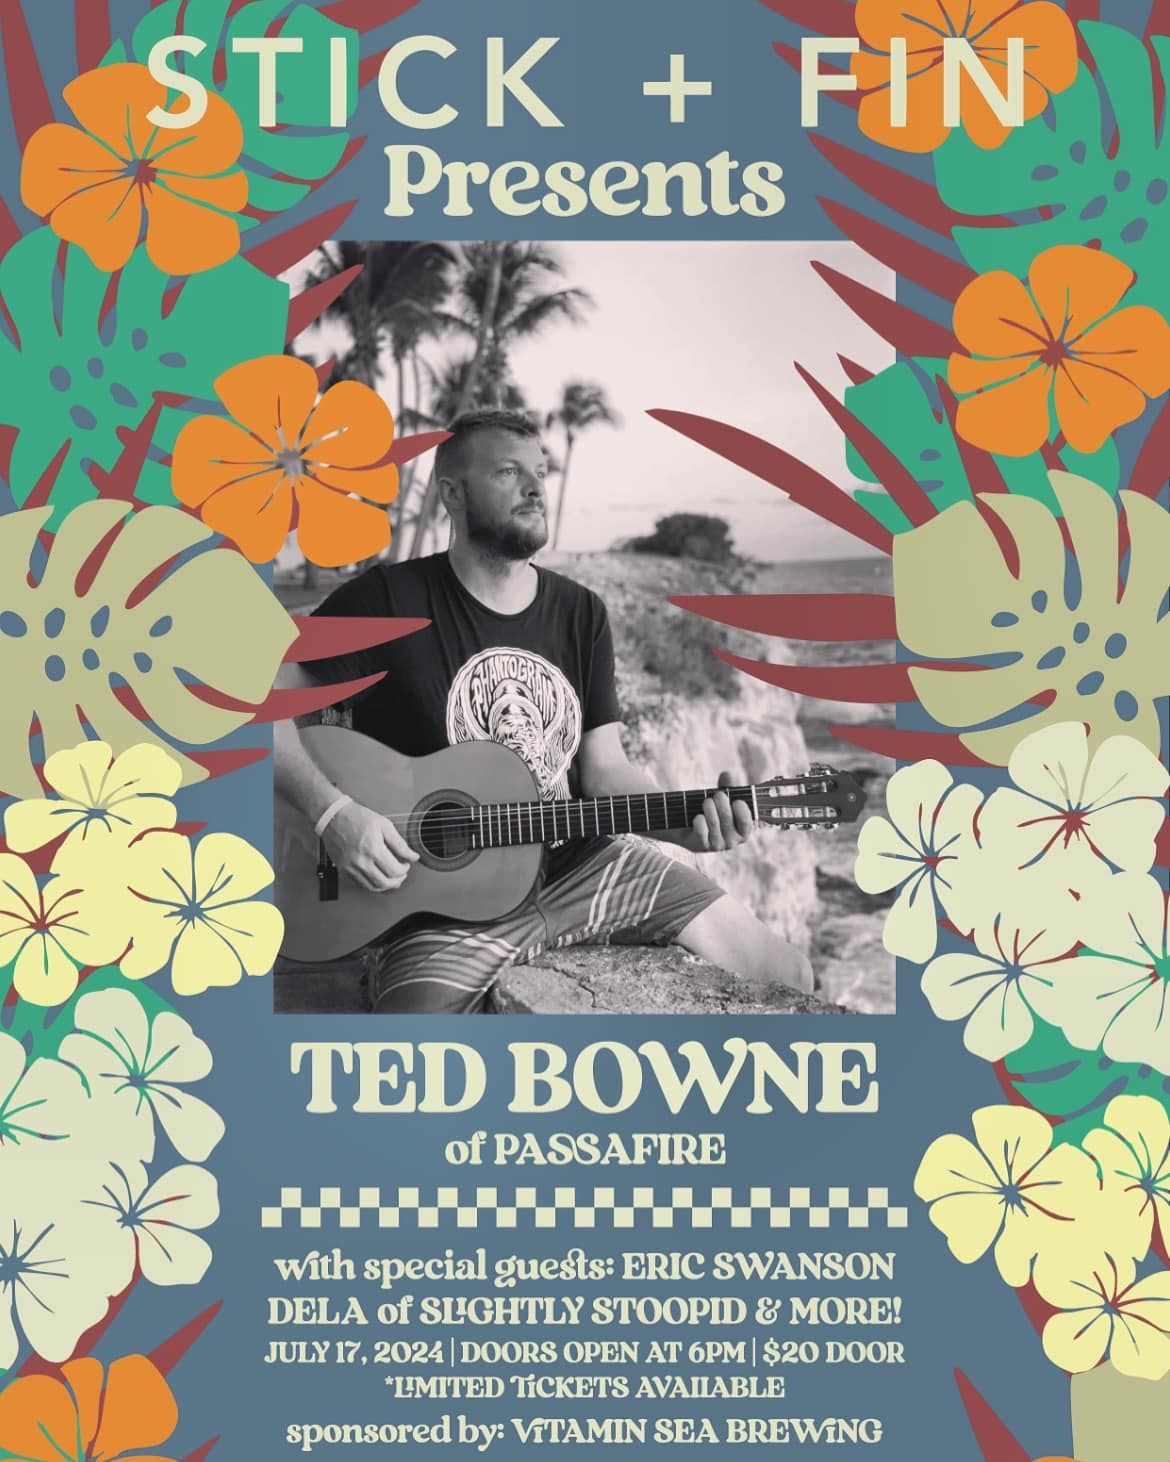 STICK+FIN PRESENTS: TED BOWNE of PASSAFIRE